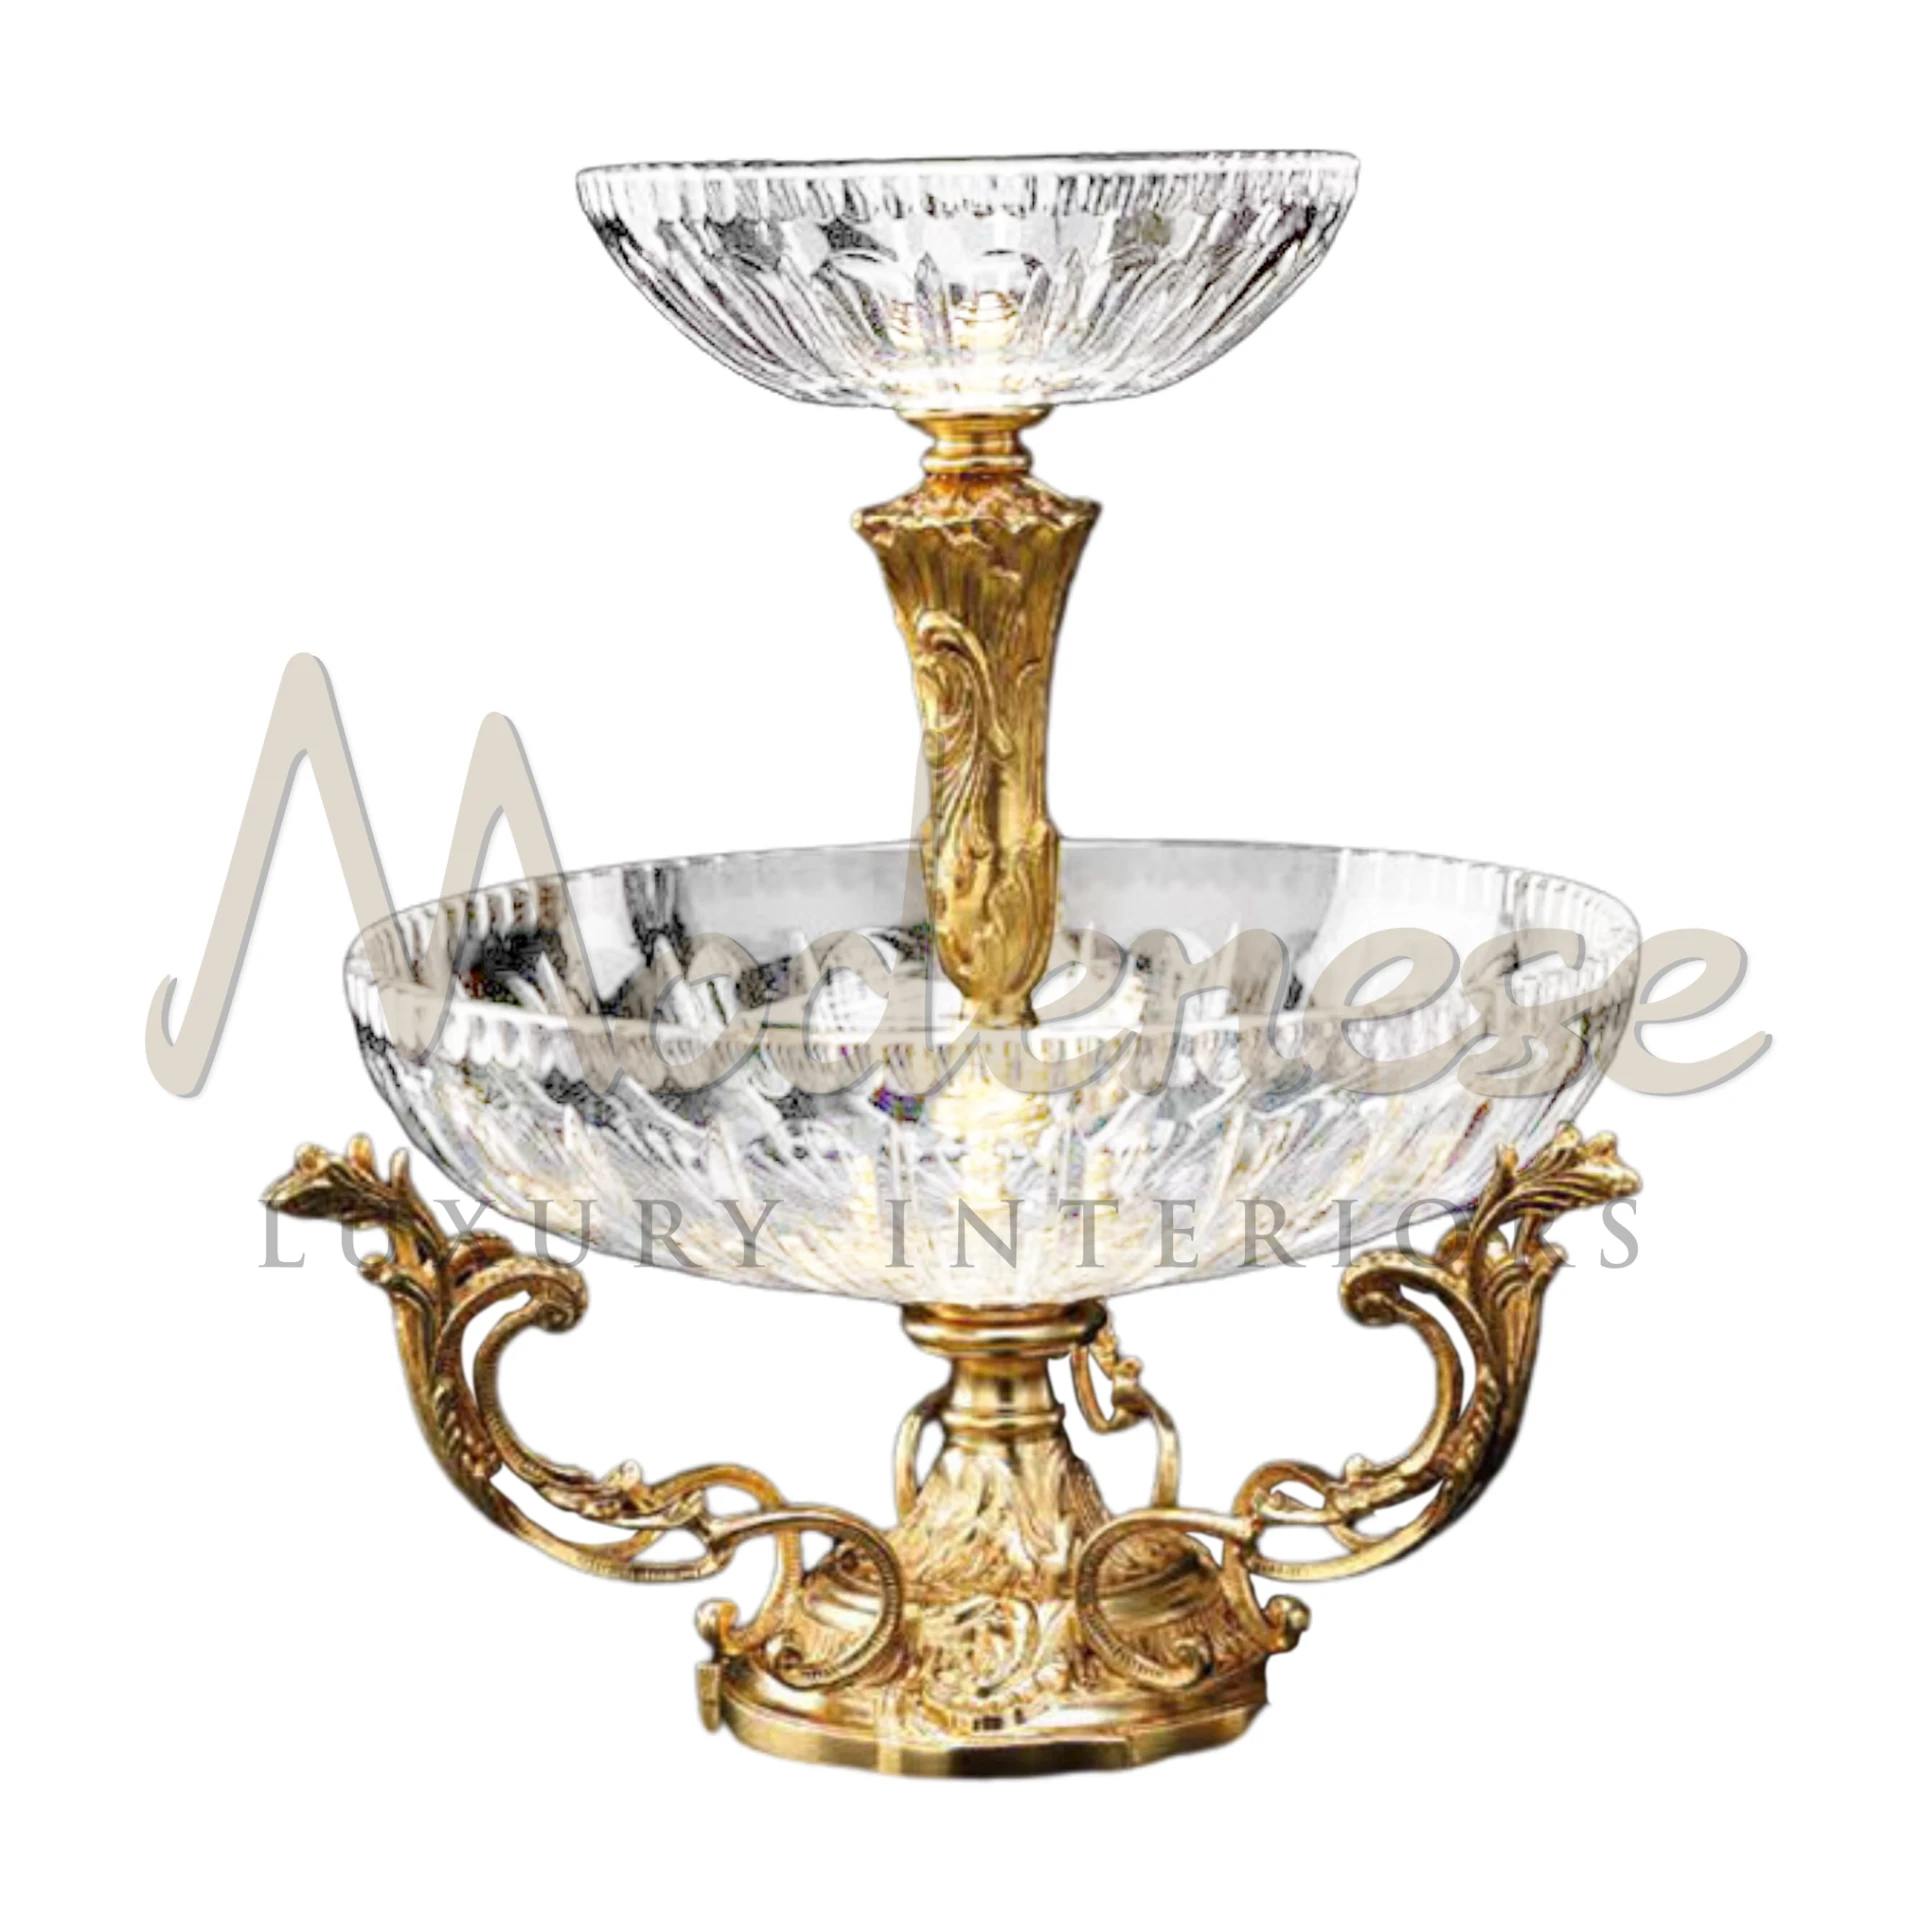 Two-Deck Crystal Bowl, a luxurious glass vase with intricate patterns, embodying classic and baroque style, ideal for enhancing luxury interiors.